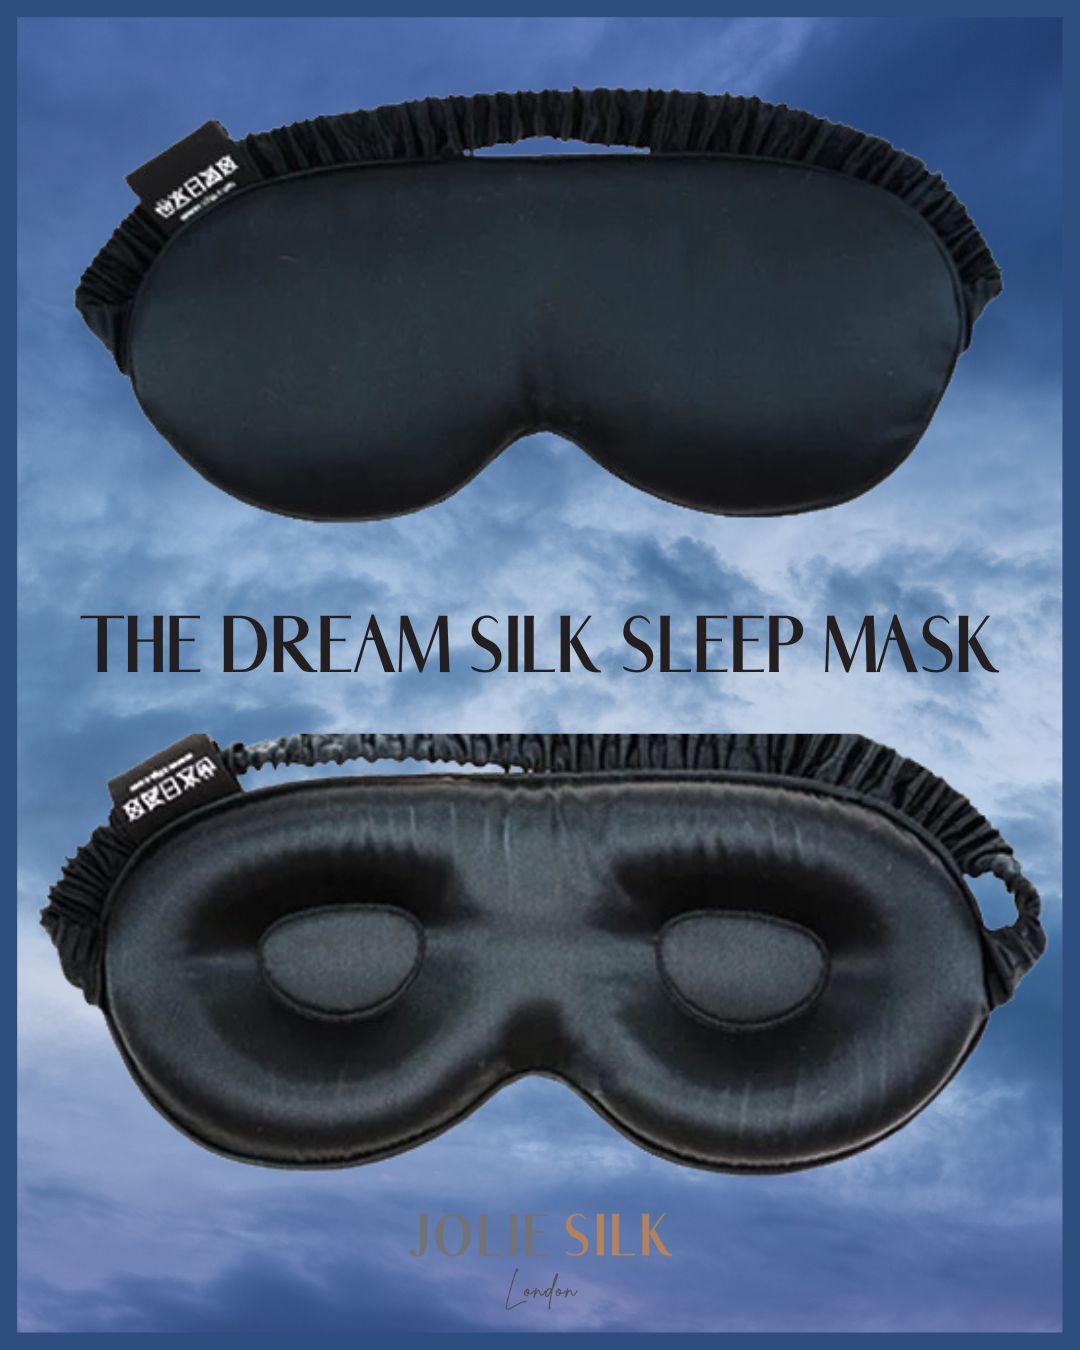 Grade 6A, 22 momme, mulberry silk eye mask. Protects your lashes while you sleep. Blackout sleep mask. Onyx Black. Full cover mask.